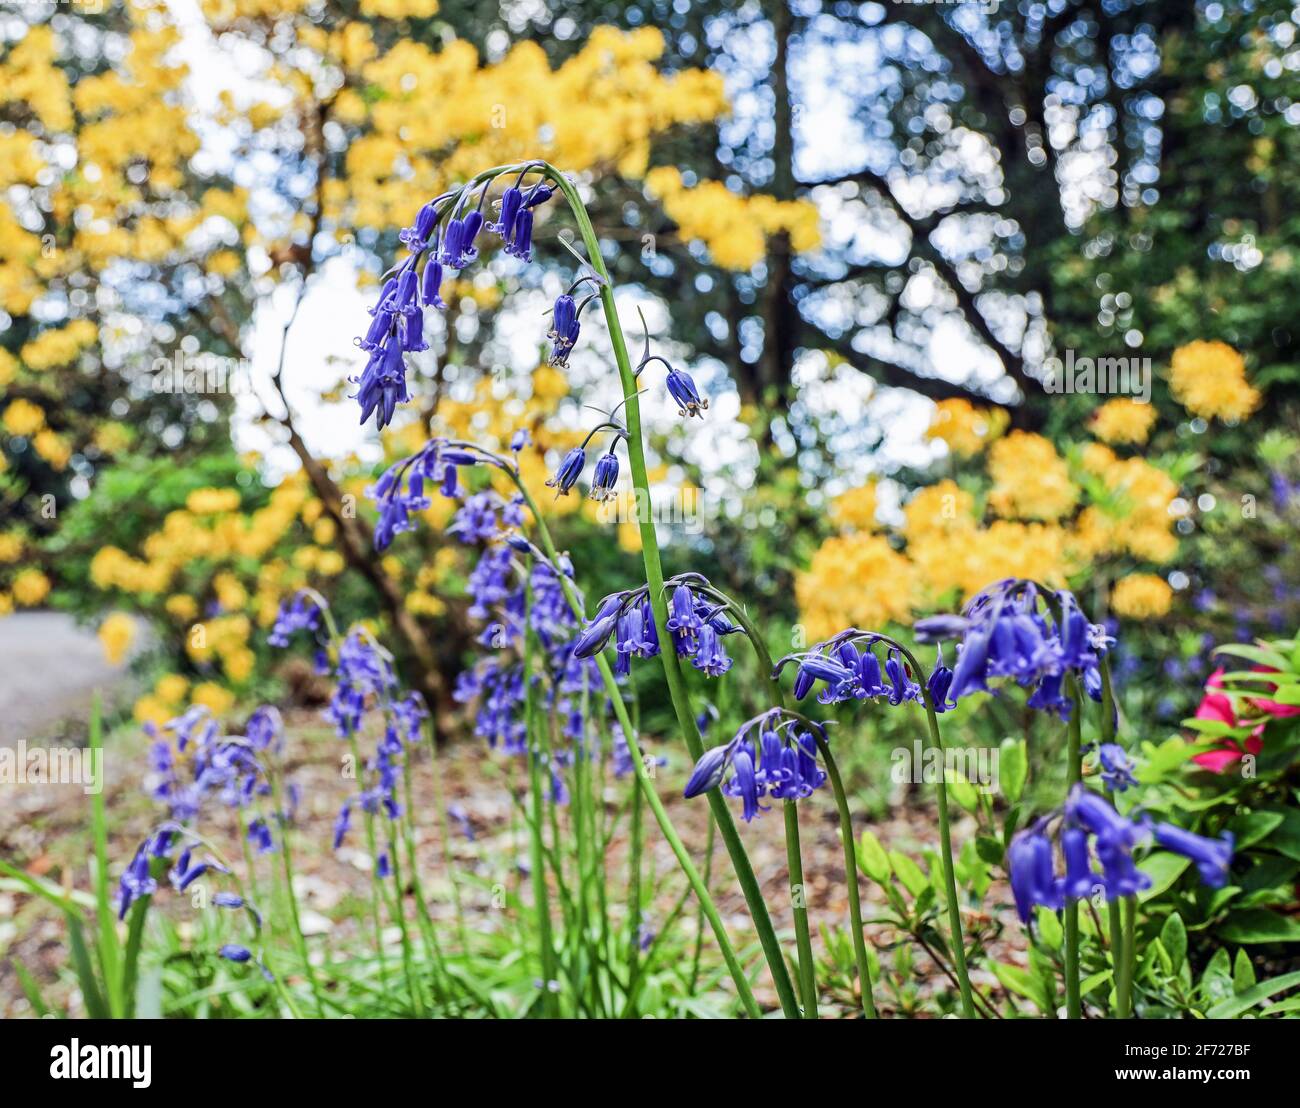 English Bluebells are native to England grow on just one side of the stem.  Growing in the formal gardens at Mount Edgcumbe Park, south east Cornwall Stock Photo